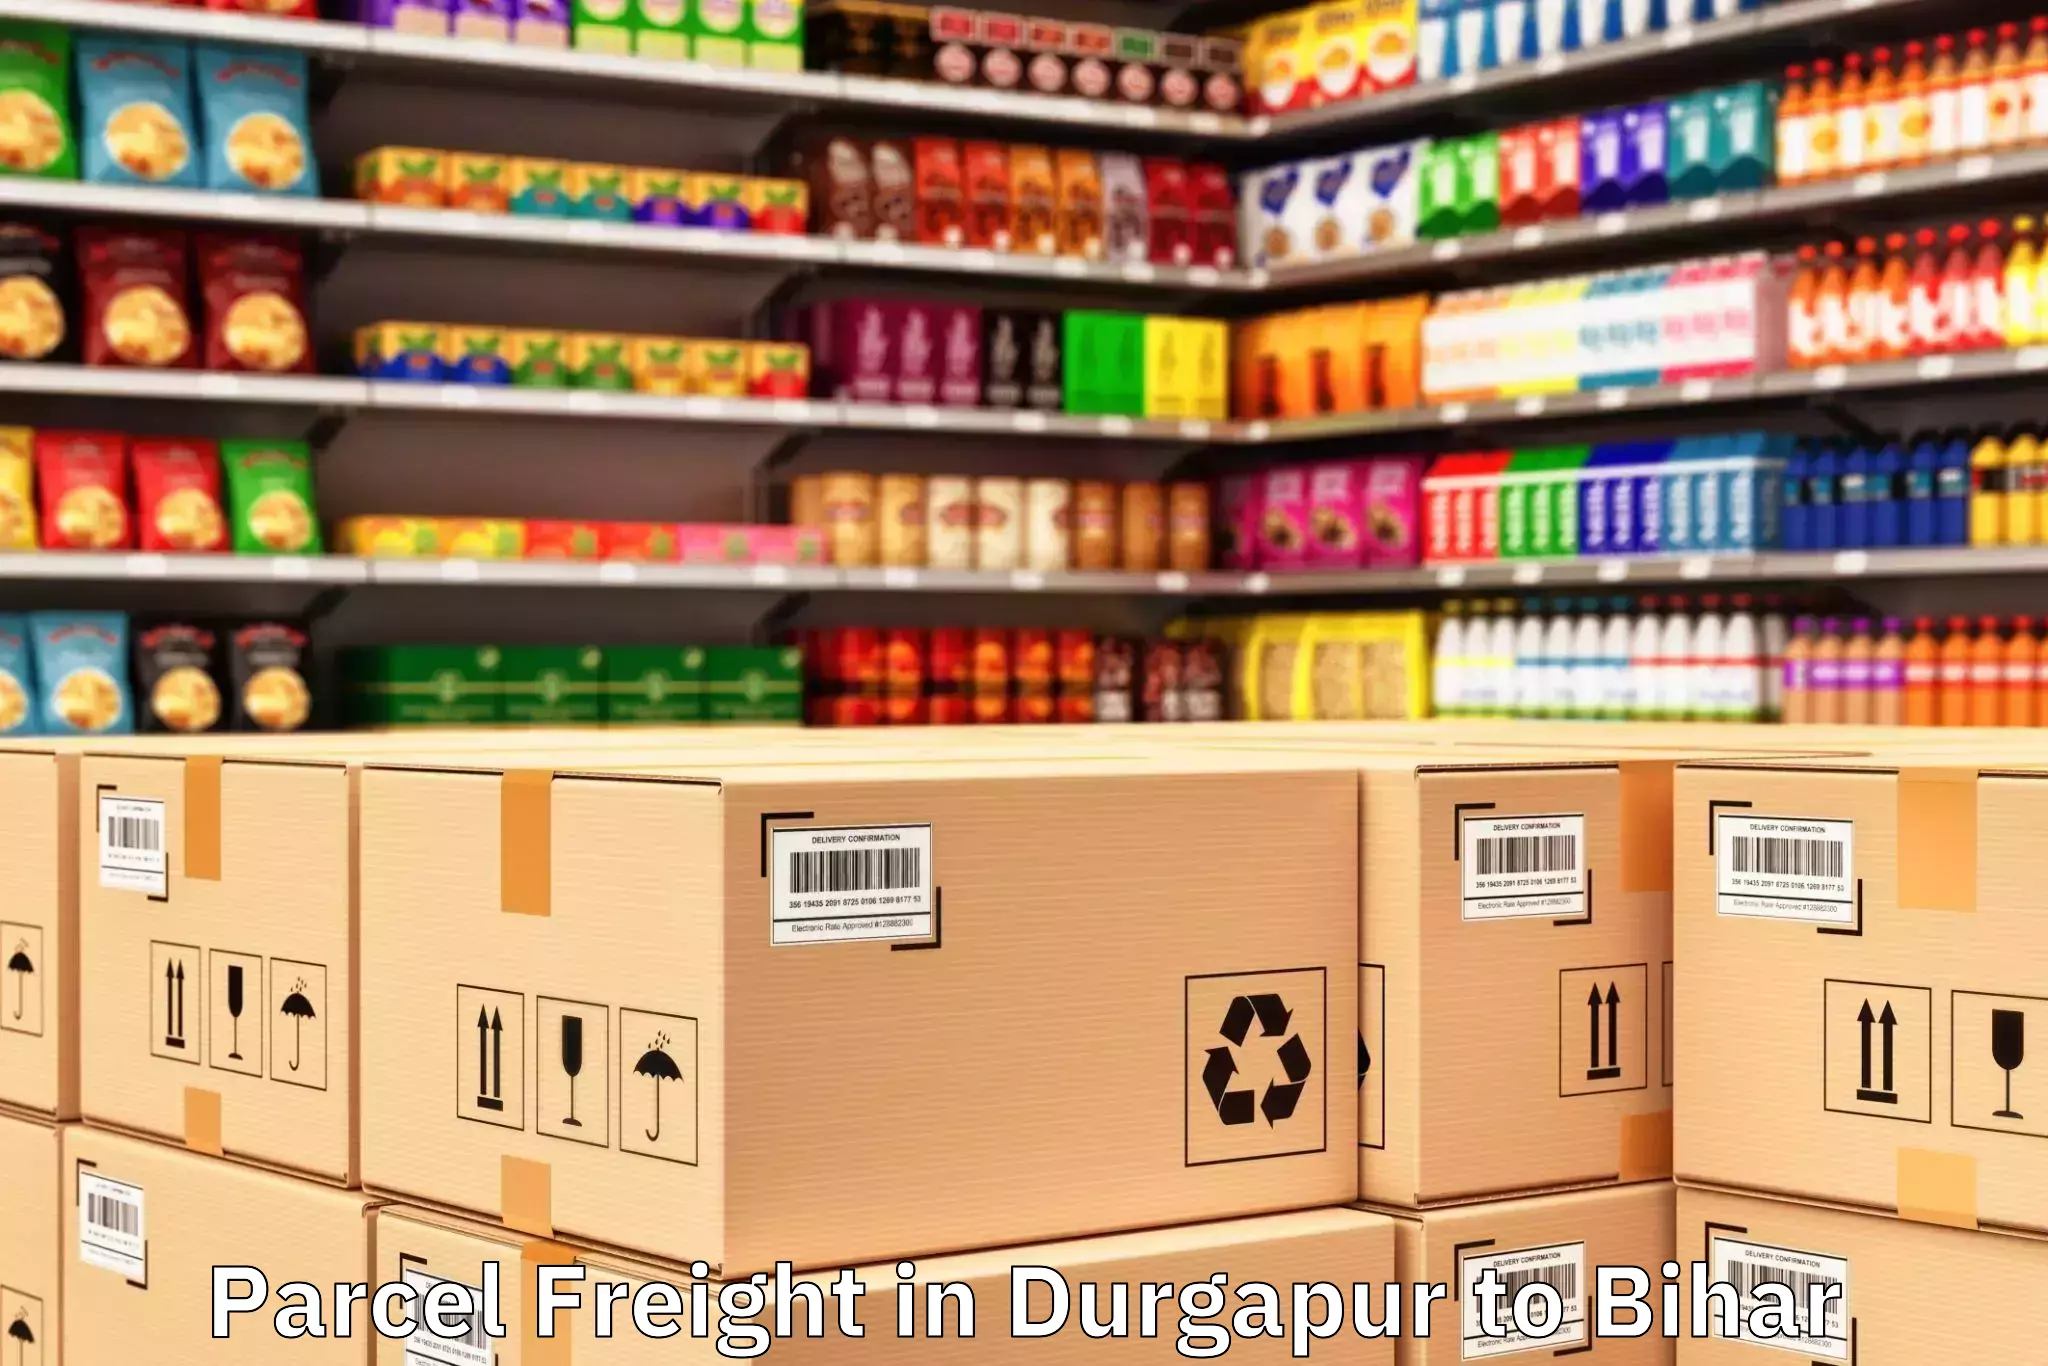 Top Durgapur to Patna One Mall Parcel Freight Available